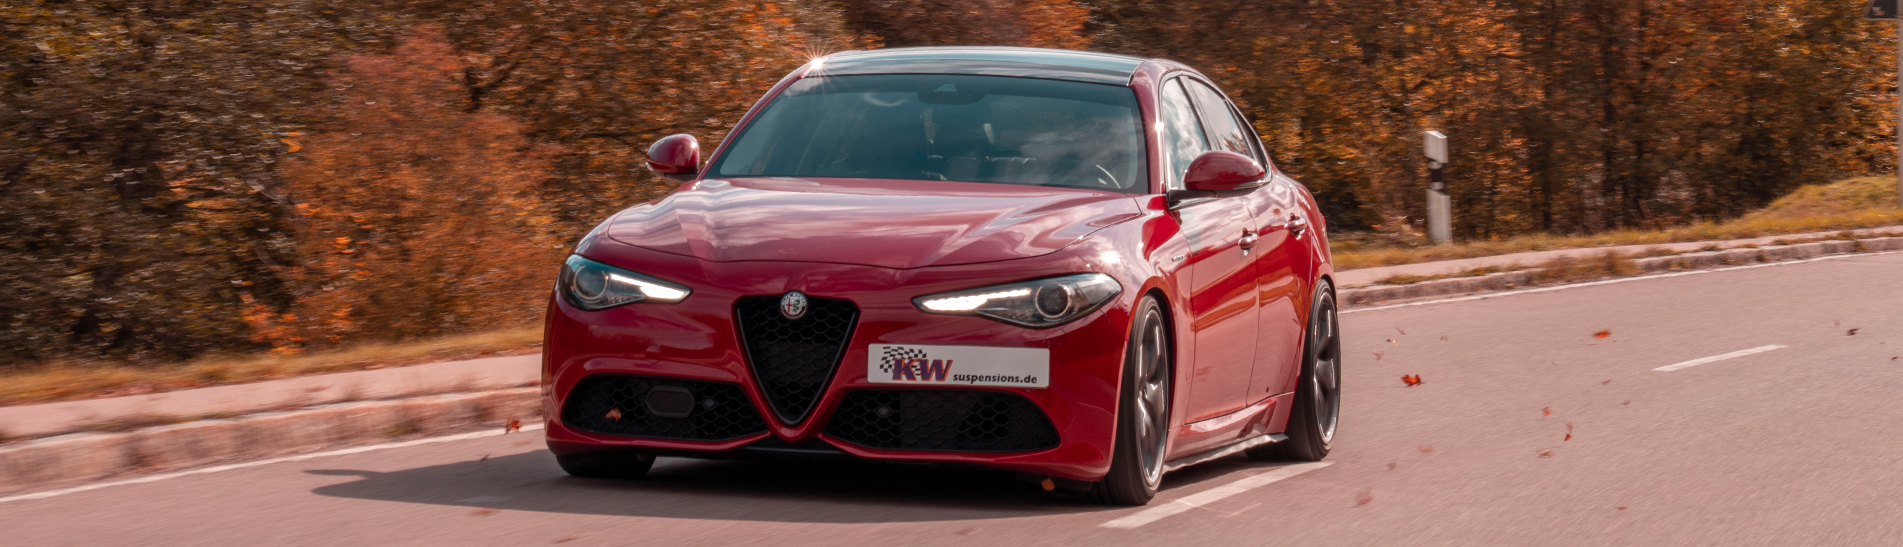 KW Variant 3 coilover suspension in an Alfa Romeo Giulia Veloce with four-wheel drive on the country road.